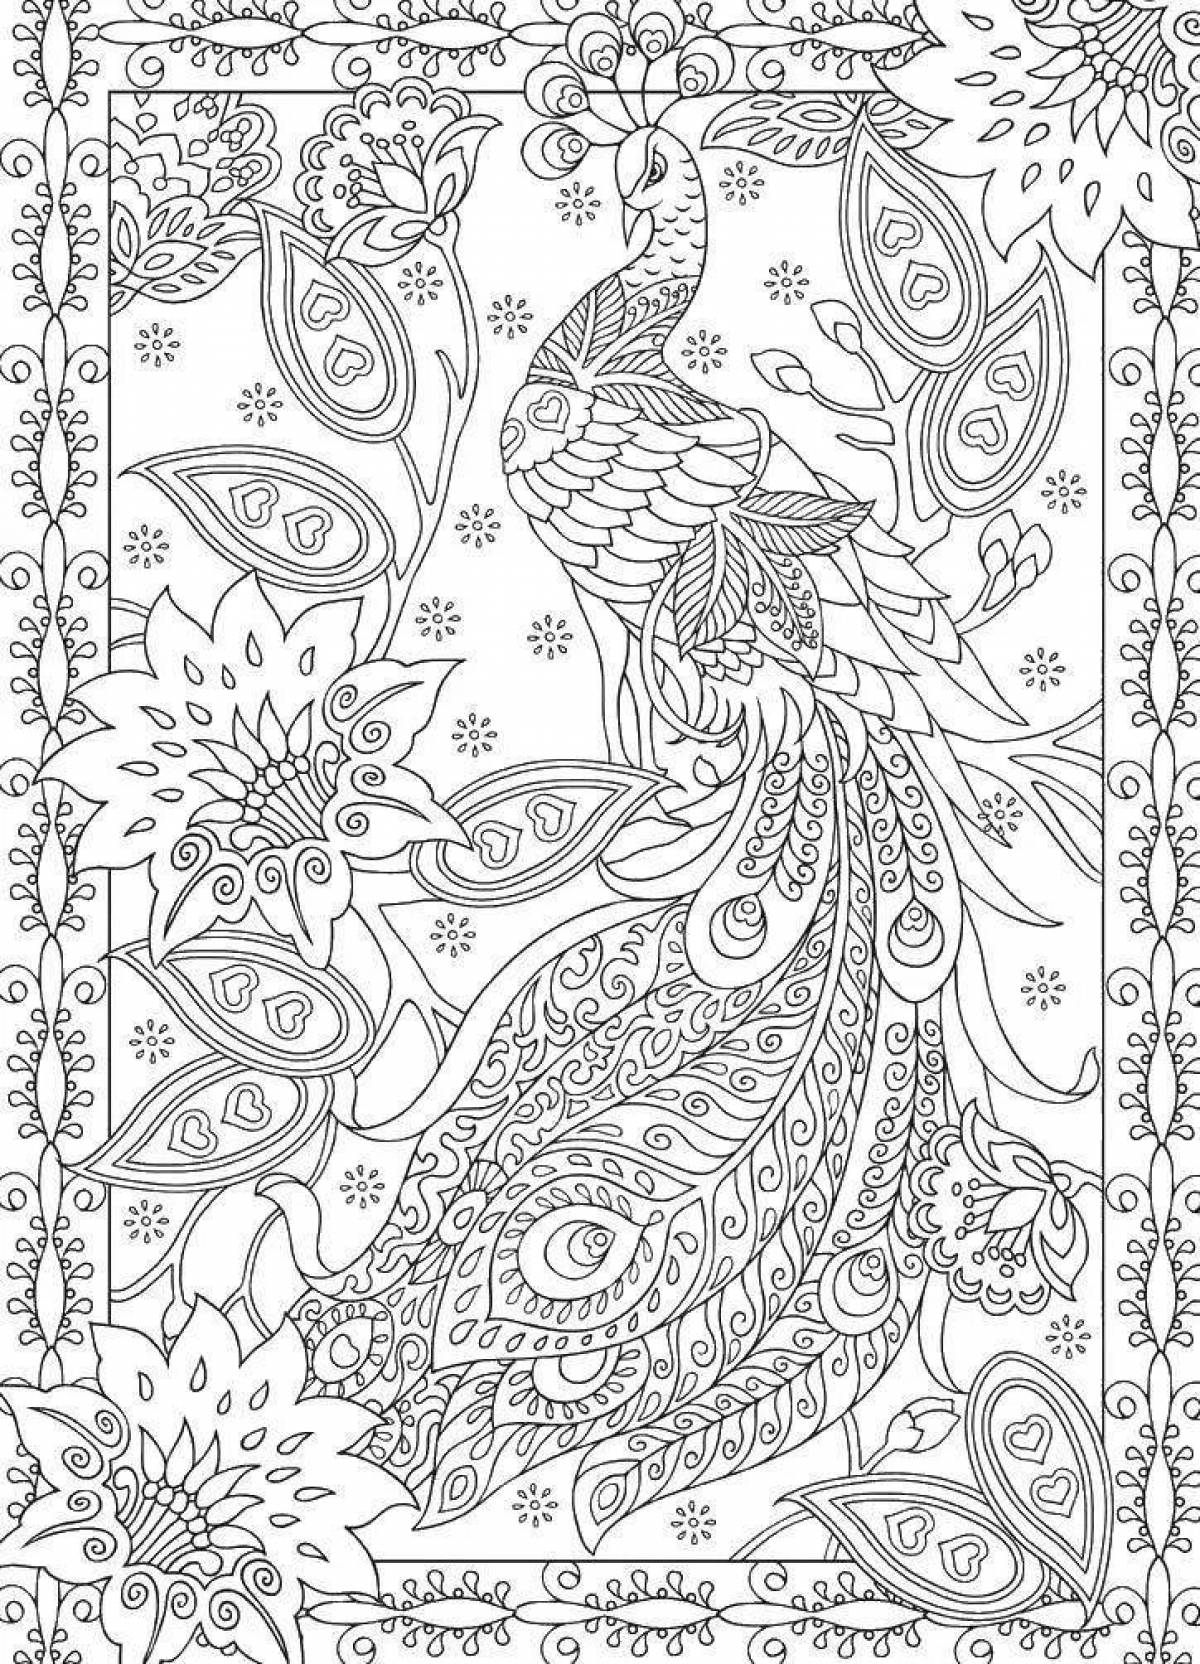 Relaxing coloring by numbers for adults